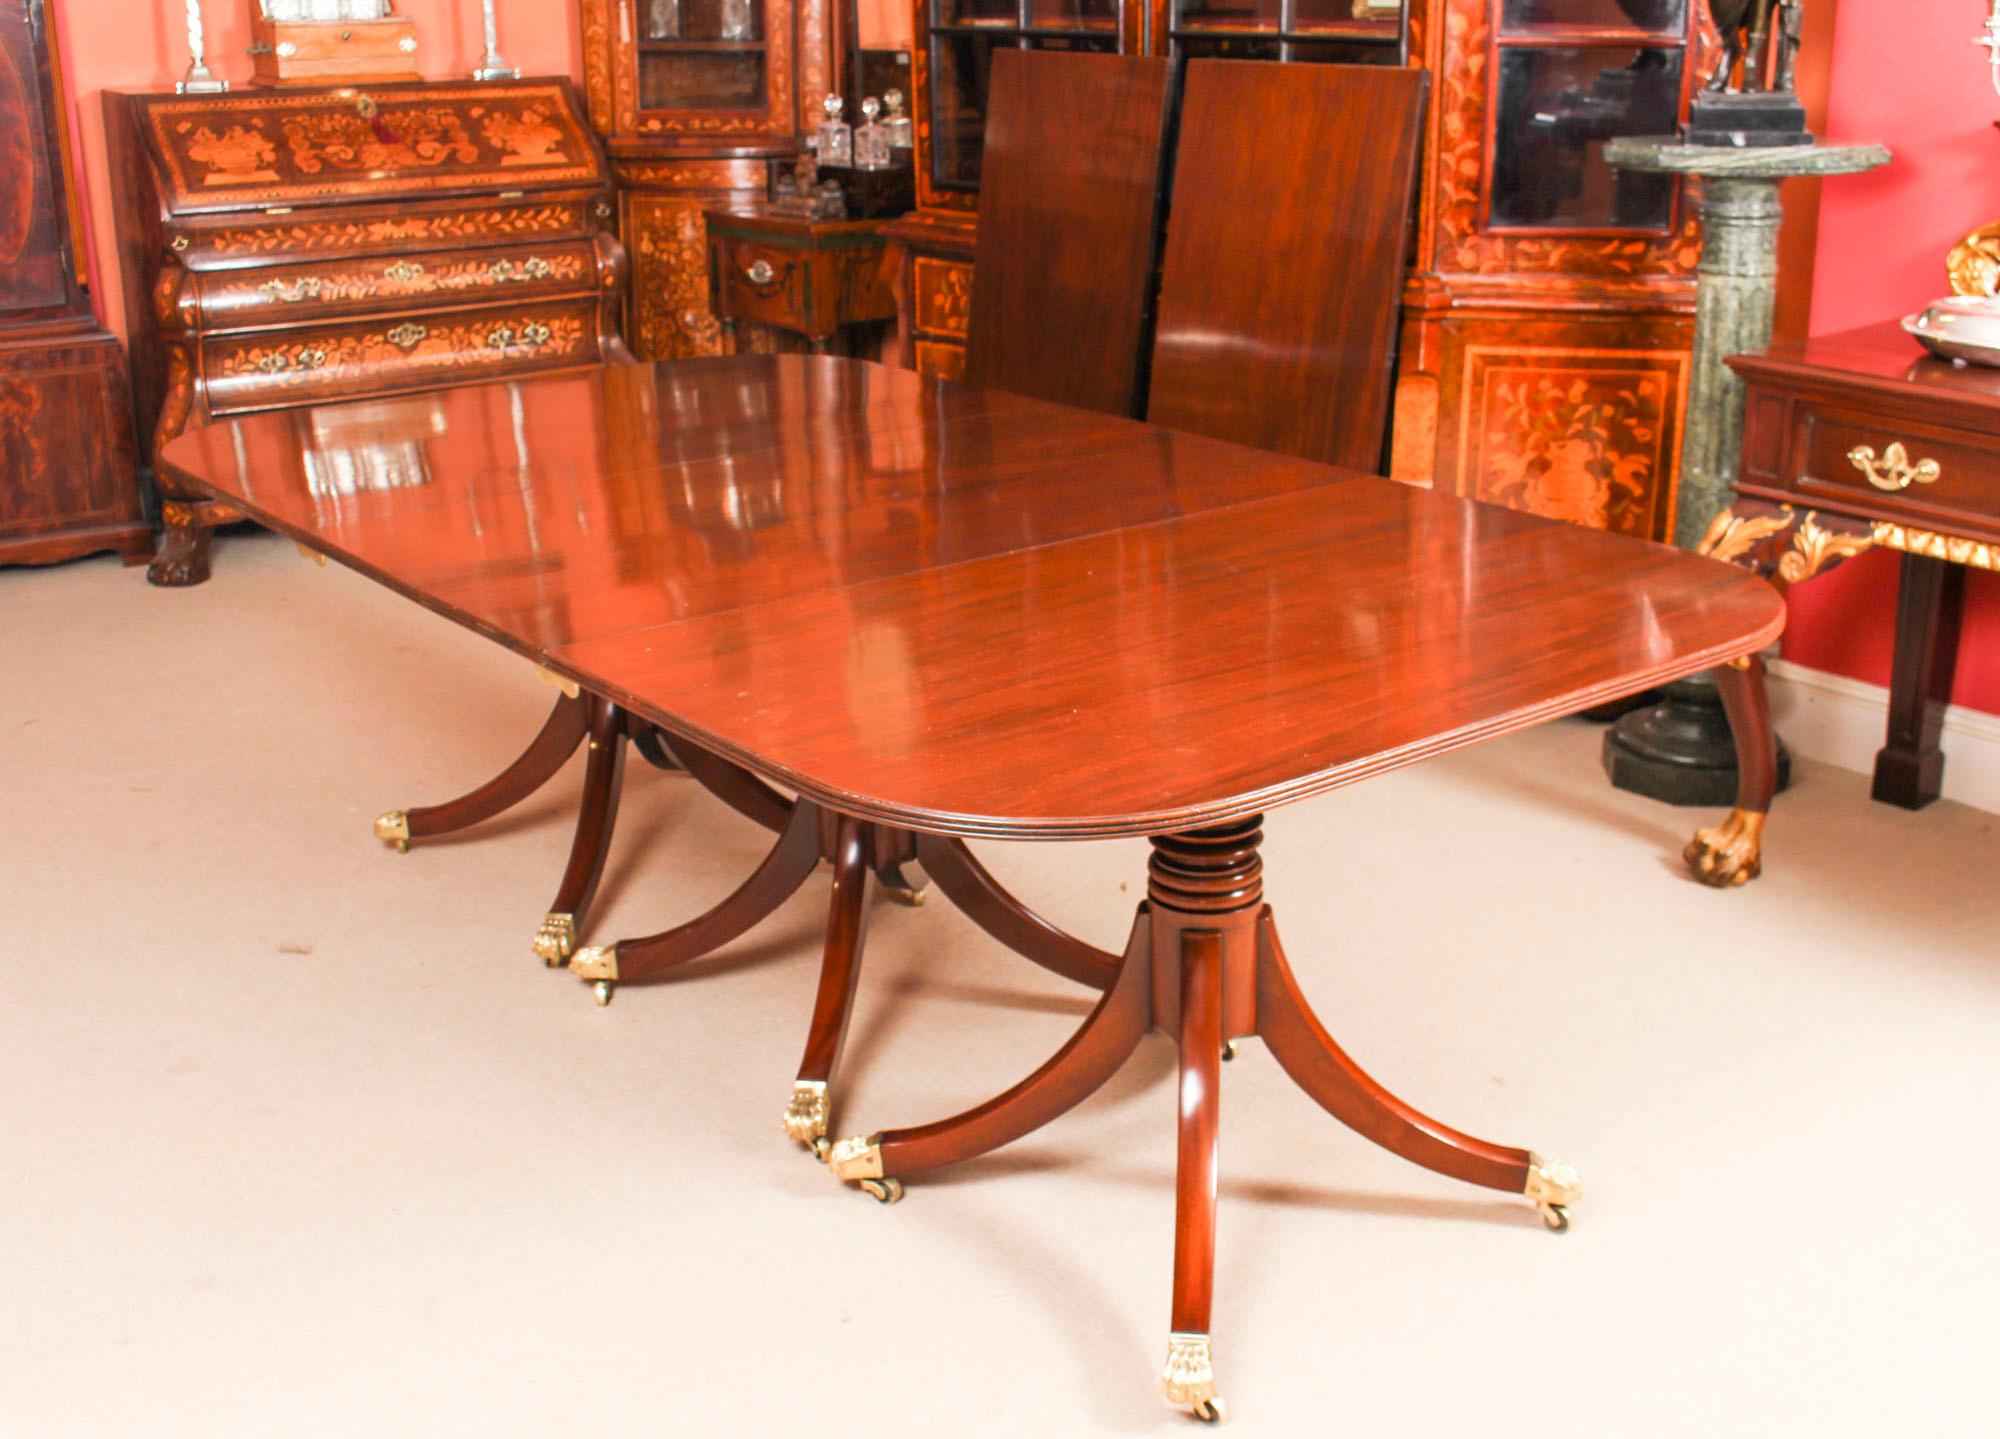 Mahogany Antique George III Regency Dining Table 19th C with 10 Dining Armchairs